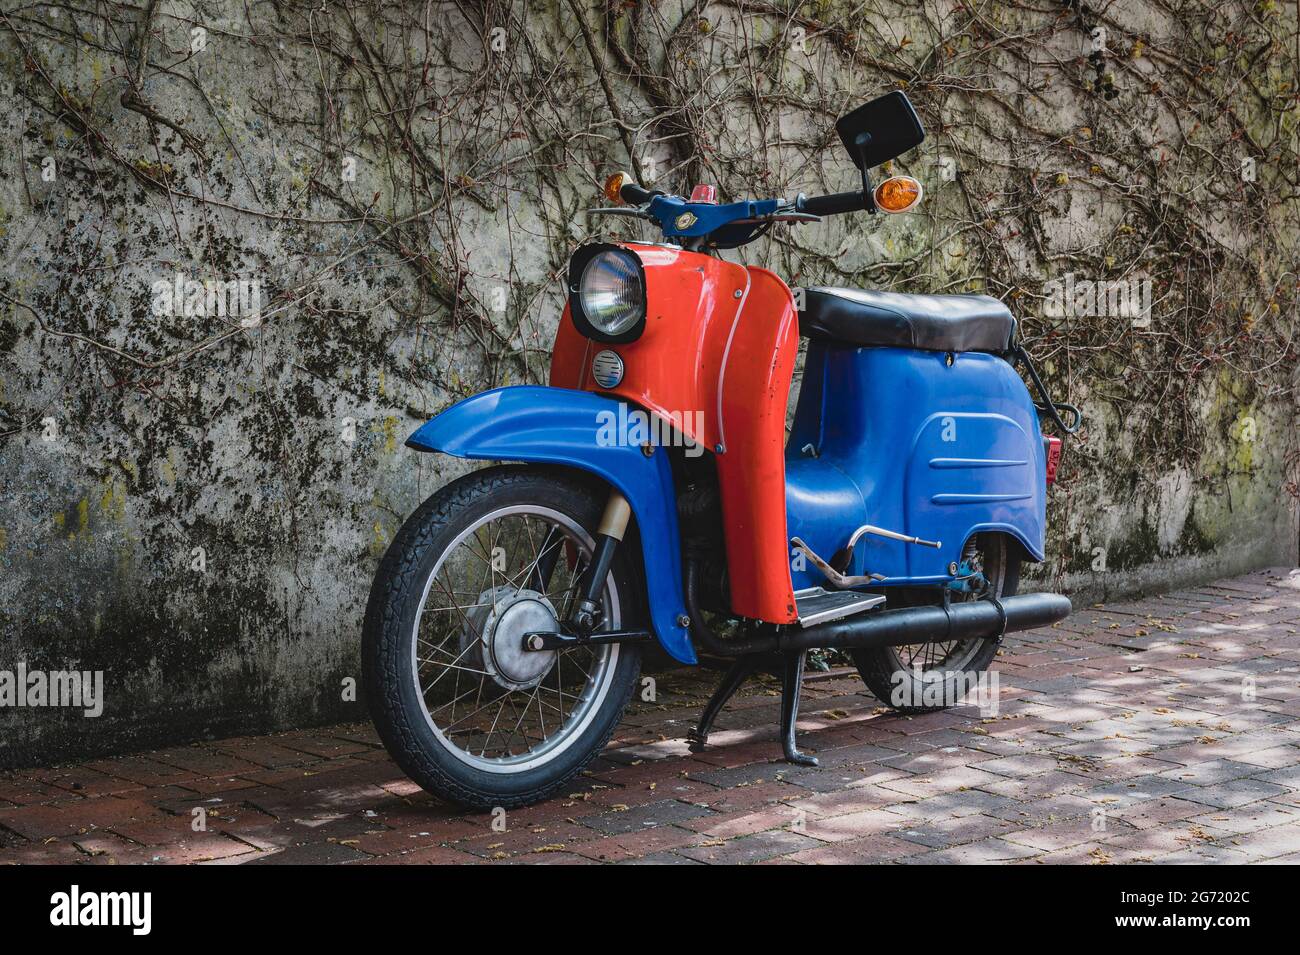 Osnabrück, Germany - April 21 2021: Simson Schwalbe moped in front of a  wall Stock Photo - Alamy